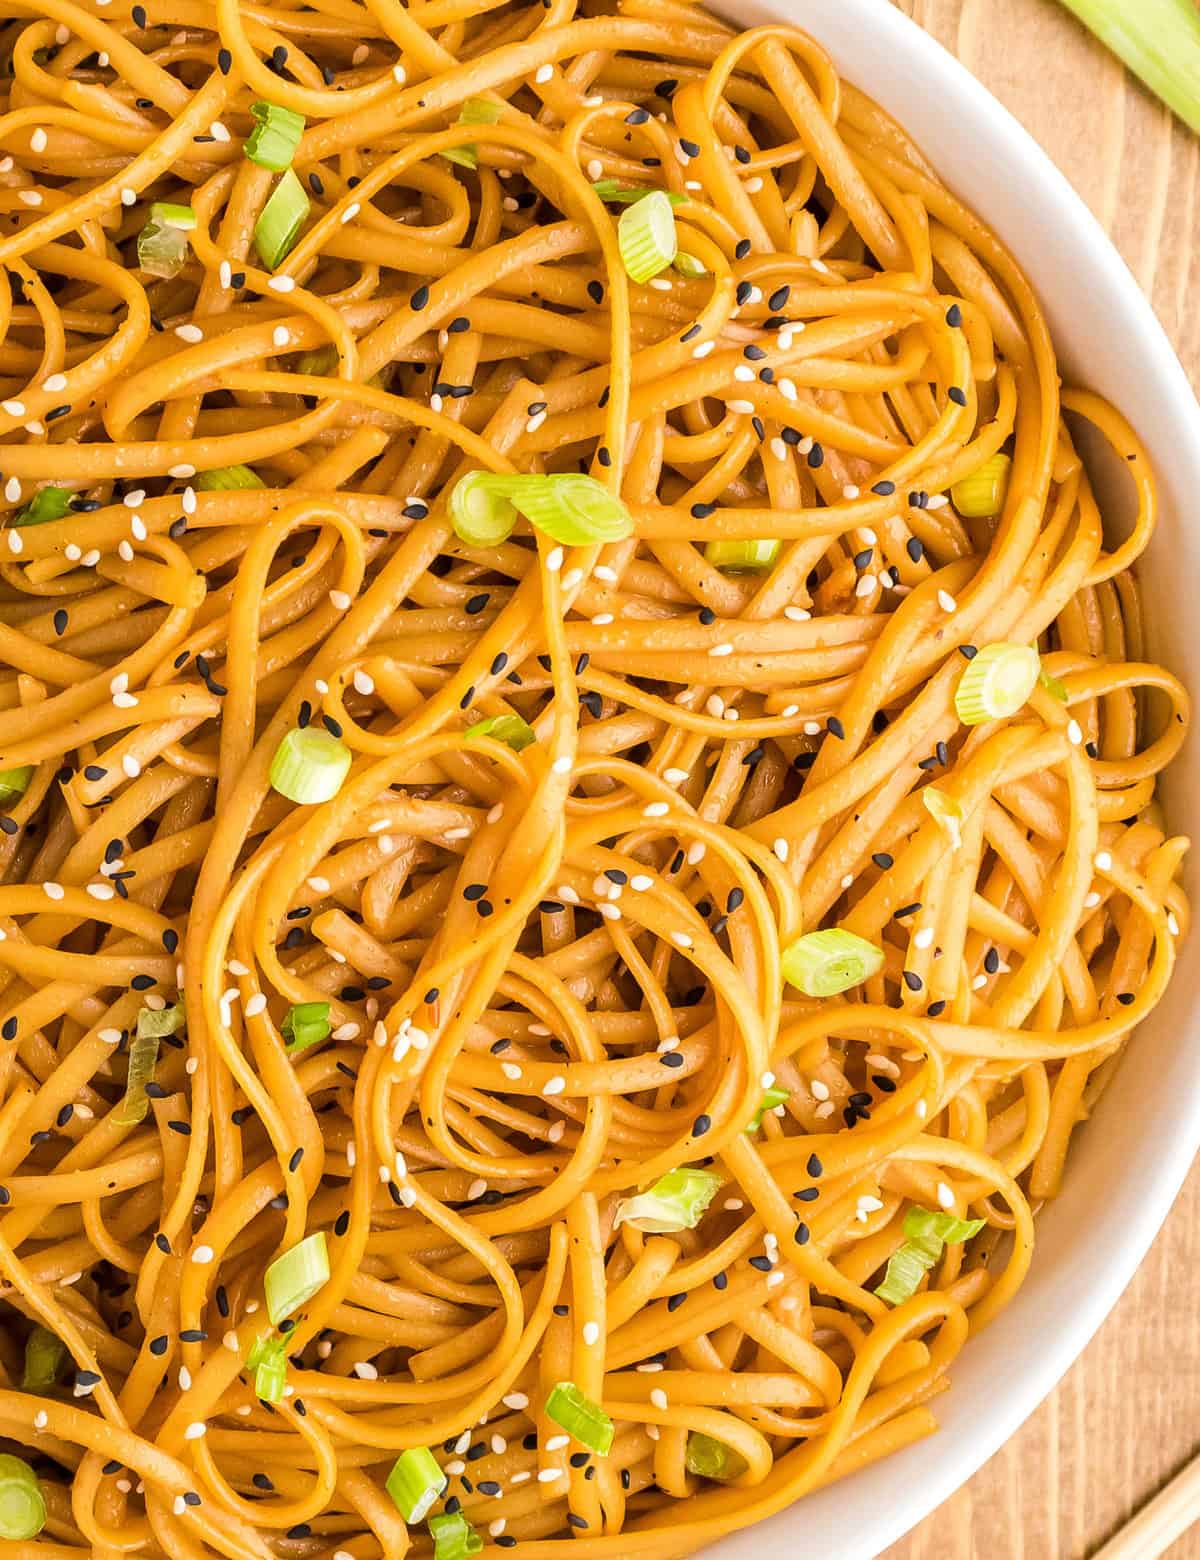 These sesame noodles have a rich sauce that's savory with a hint of spice and sweetness. They're made quickly, can be served hot or cold, and are perfect as a side dish or add some veggies and protein for an easy main dish!